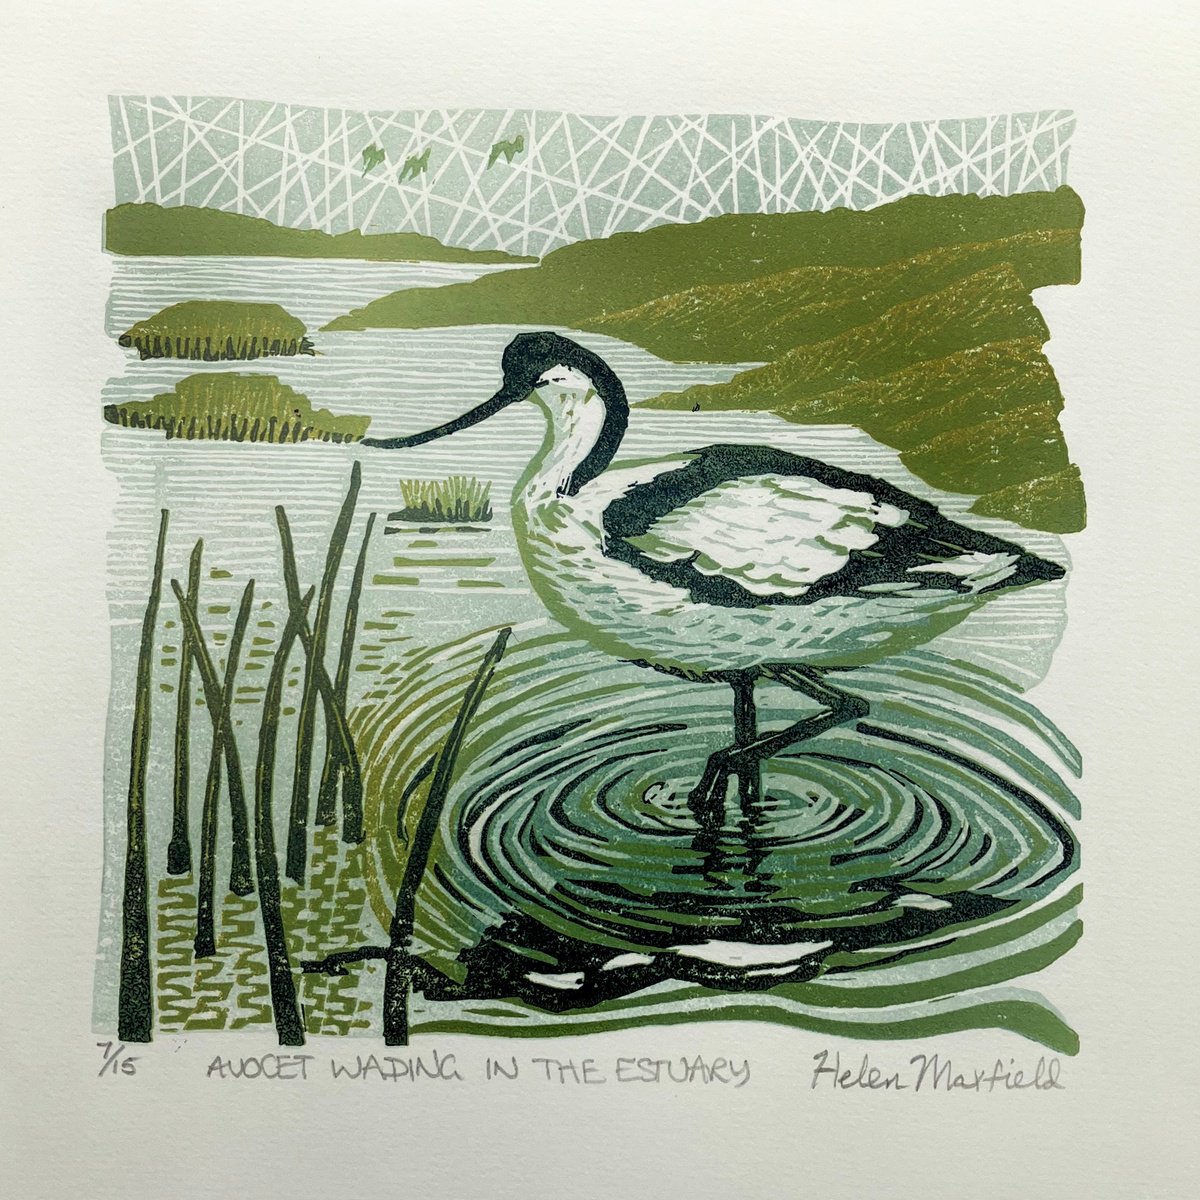 Avocet wading in the Estuary by Helen Maxfield